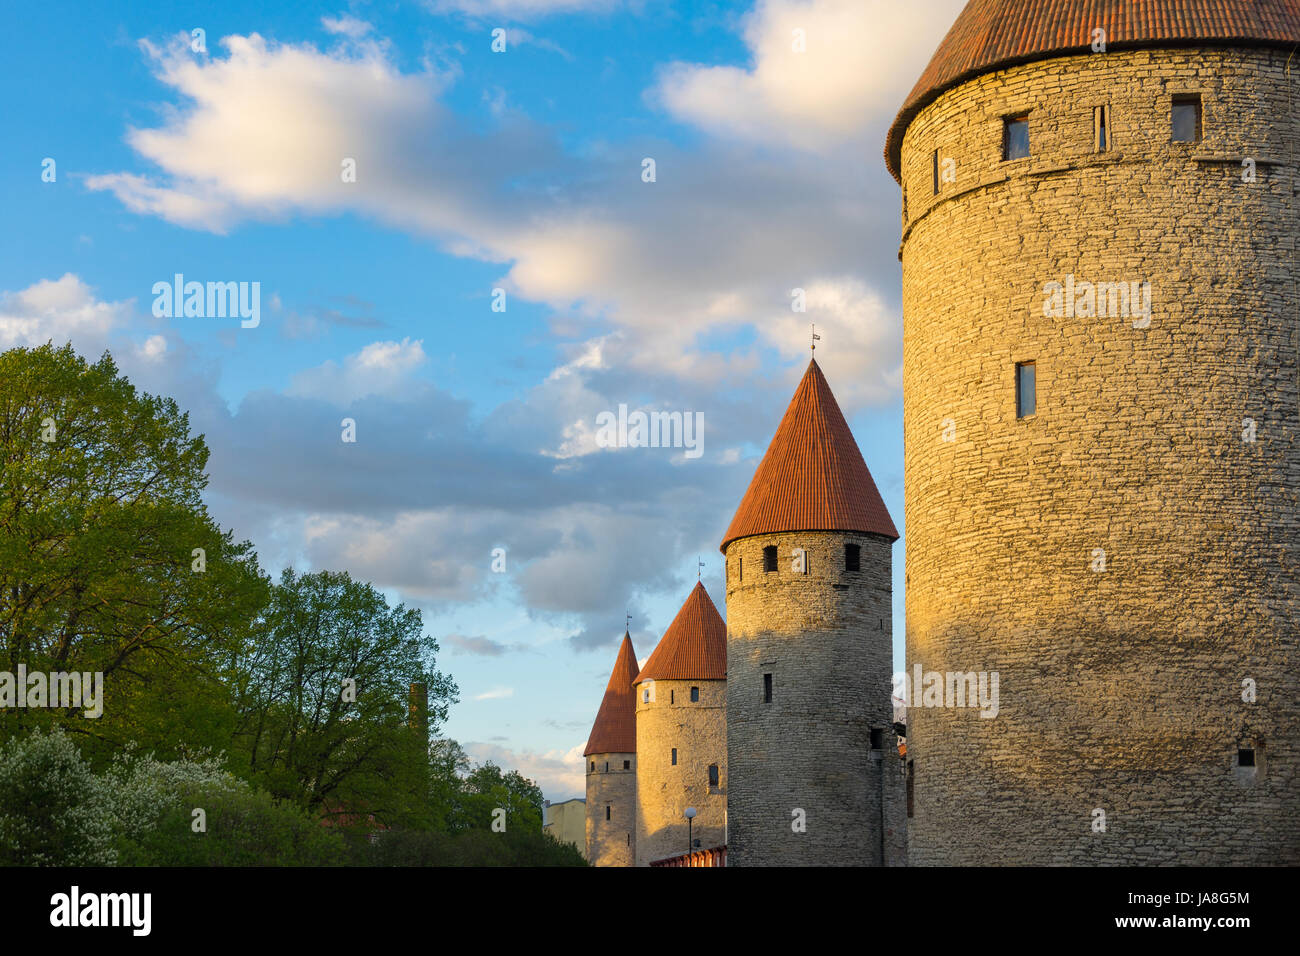 Fortress towers in a row against blue sky and clouds. Springtime evening in Tallinn, Estonia Stock Photo